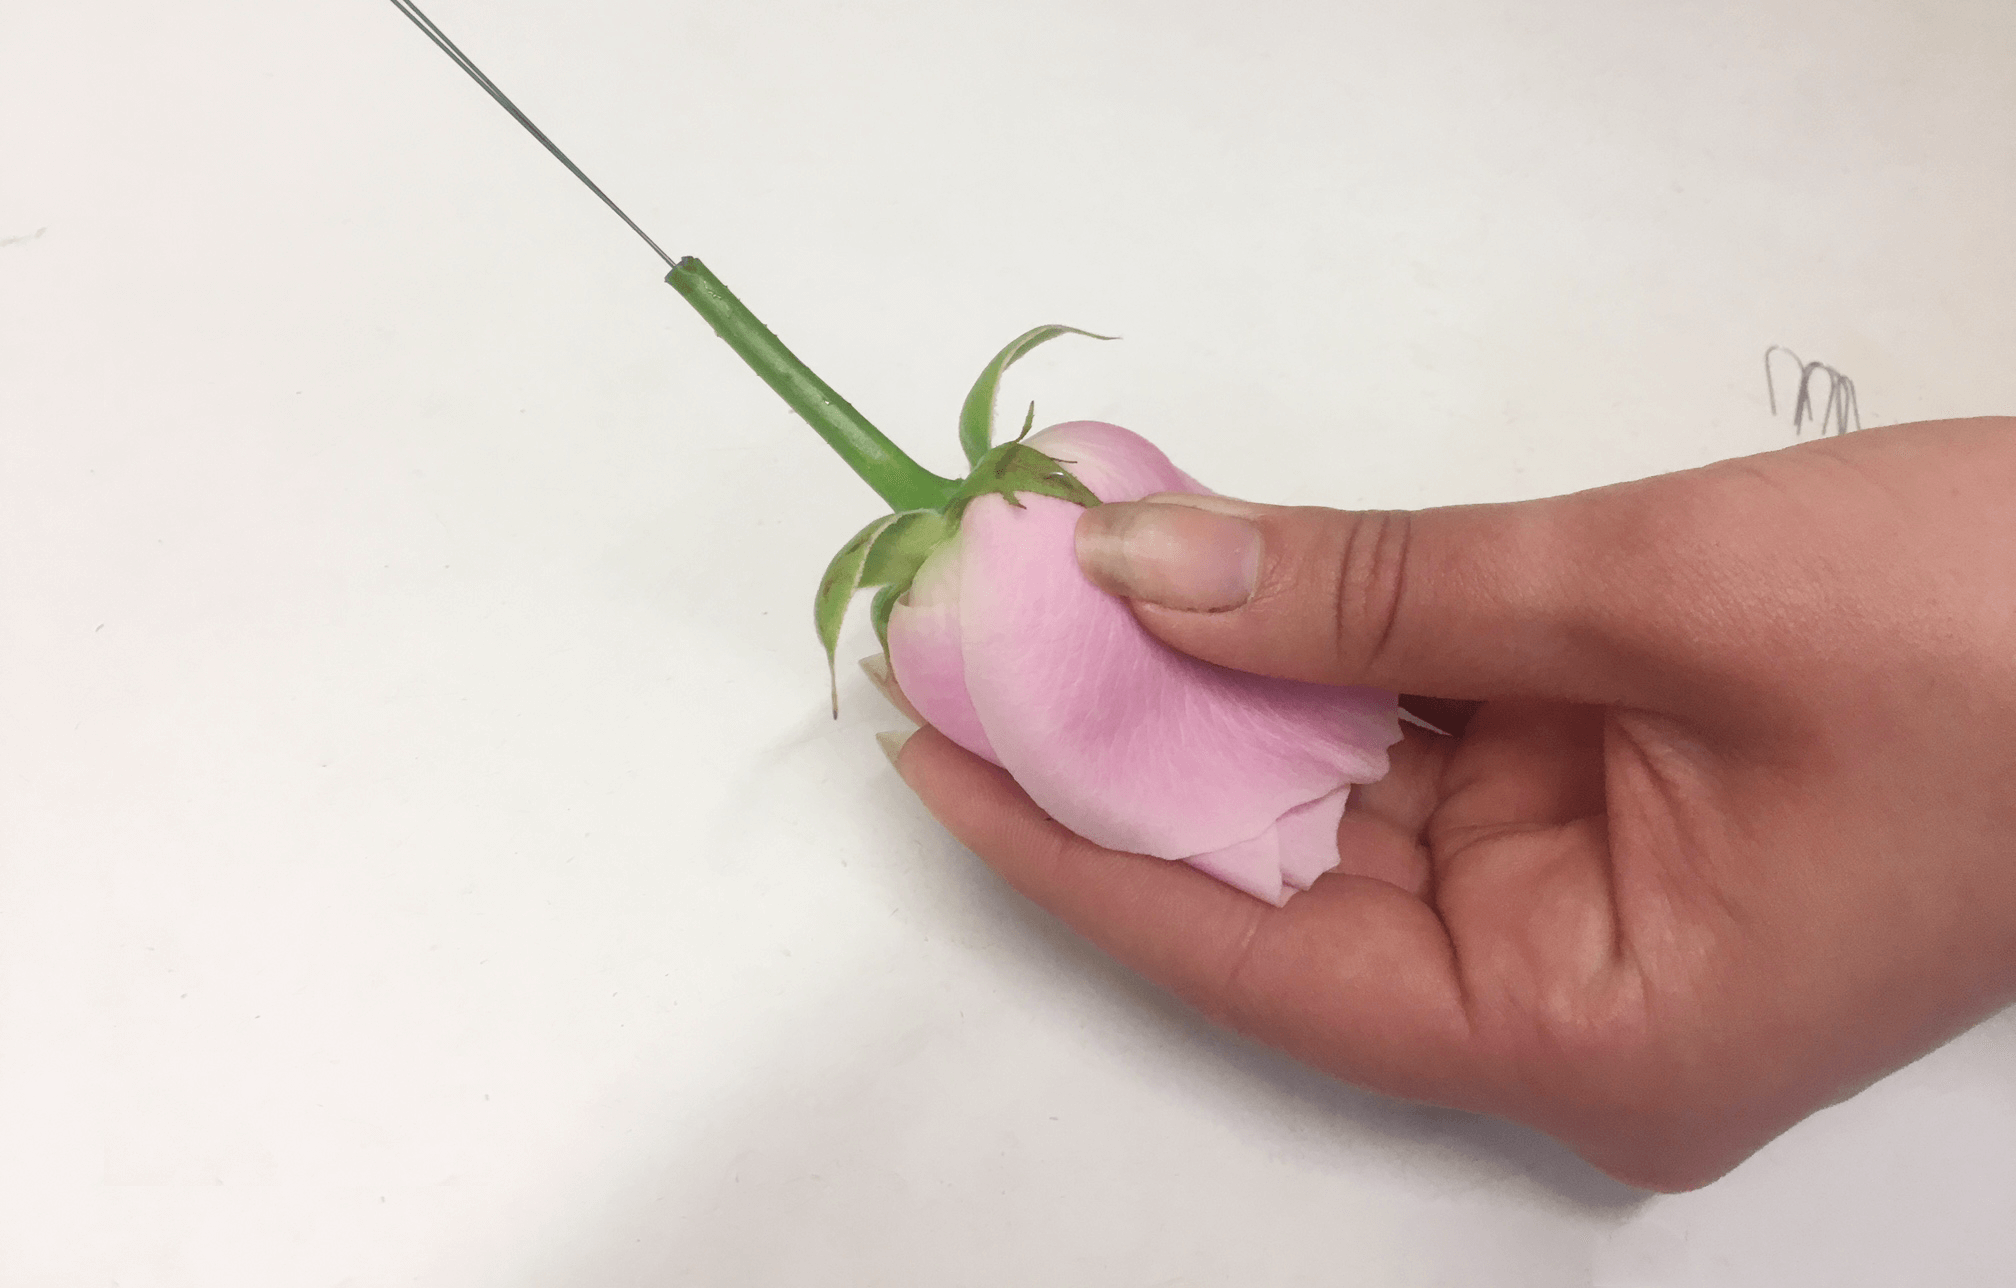 
                                                    Continue to repeat this process for all of the sepals. Using green stub wire, push the wire up and through the stem and into the base of the rose (only a few mm). This will structurally support the rose. 